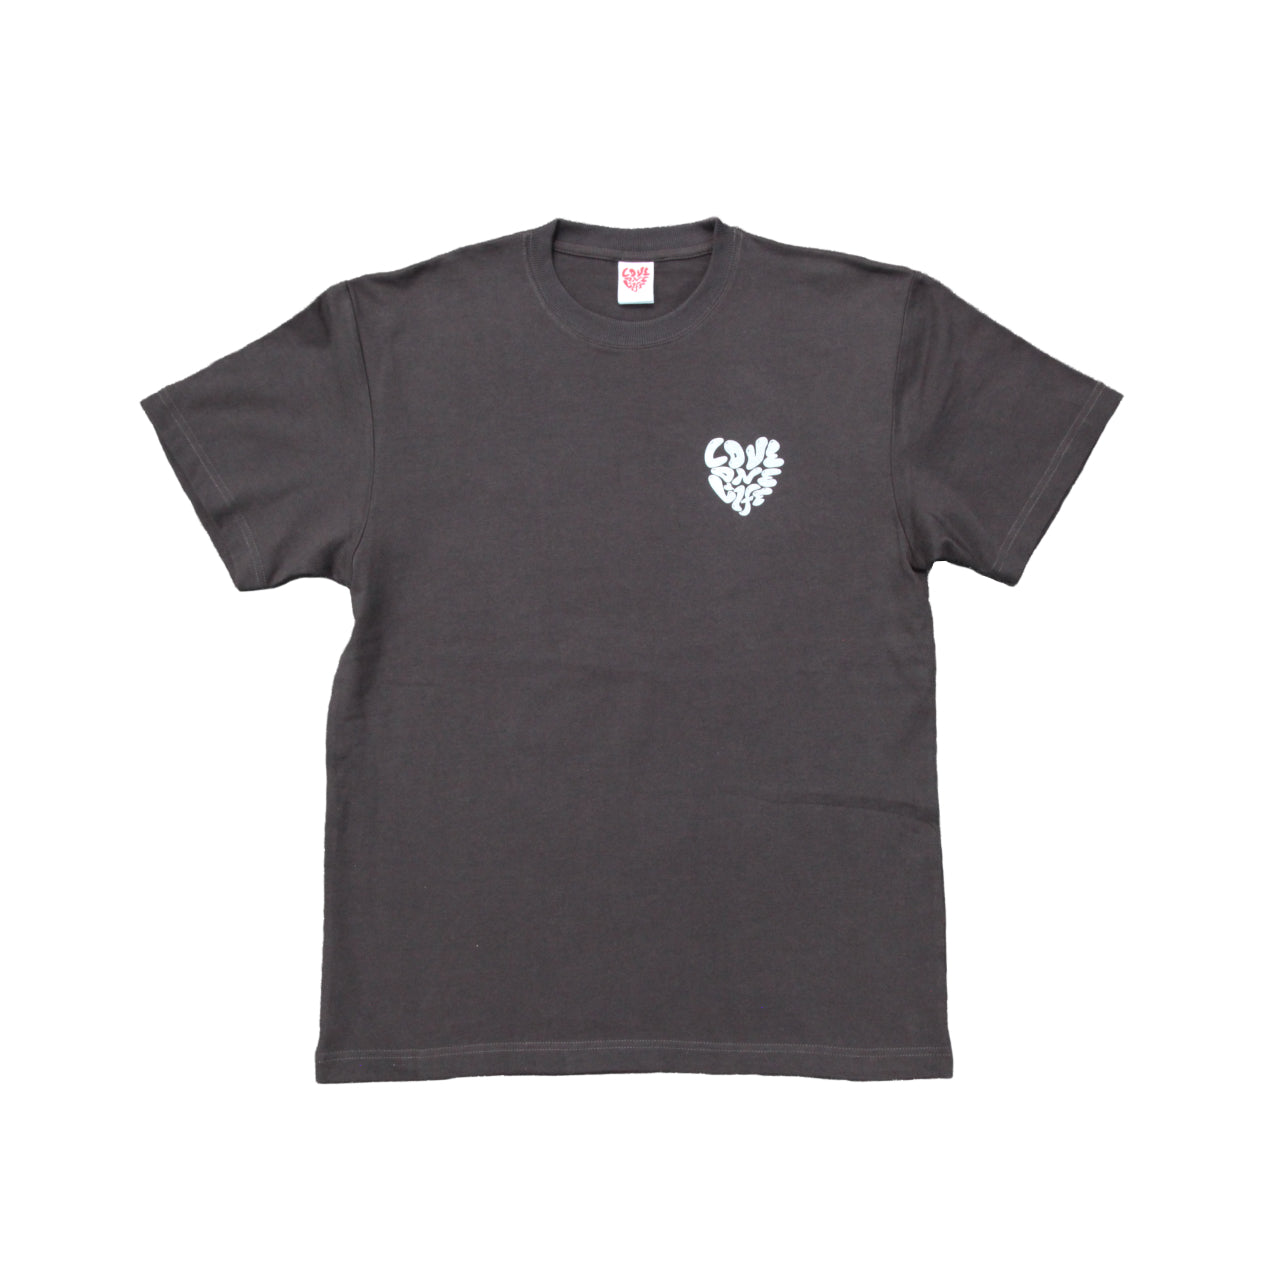 don't trash the earth tee in dark charcoal